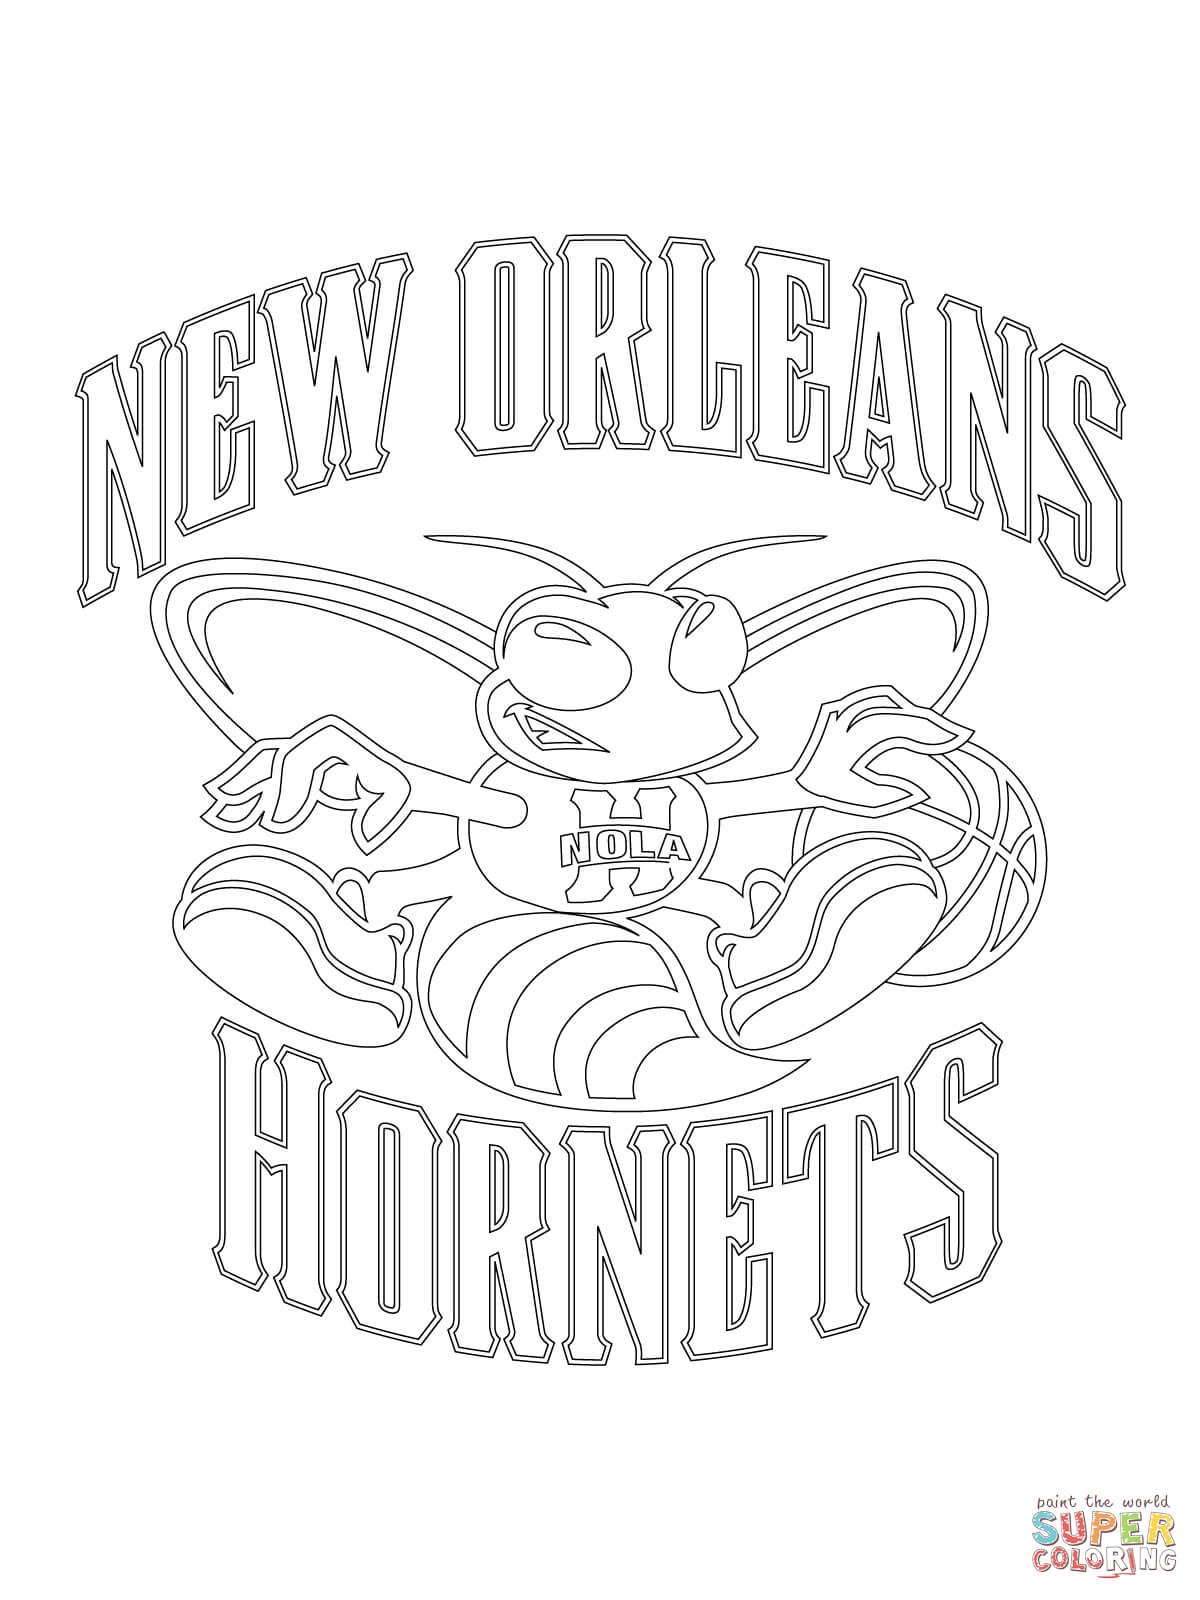 New orleans hornets logo coloring page free printable coloring pages